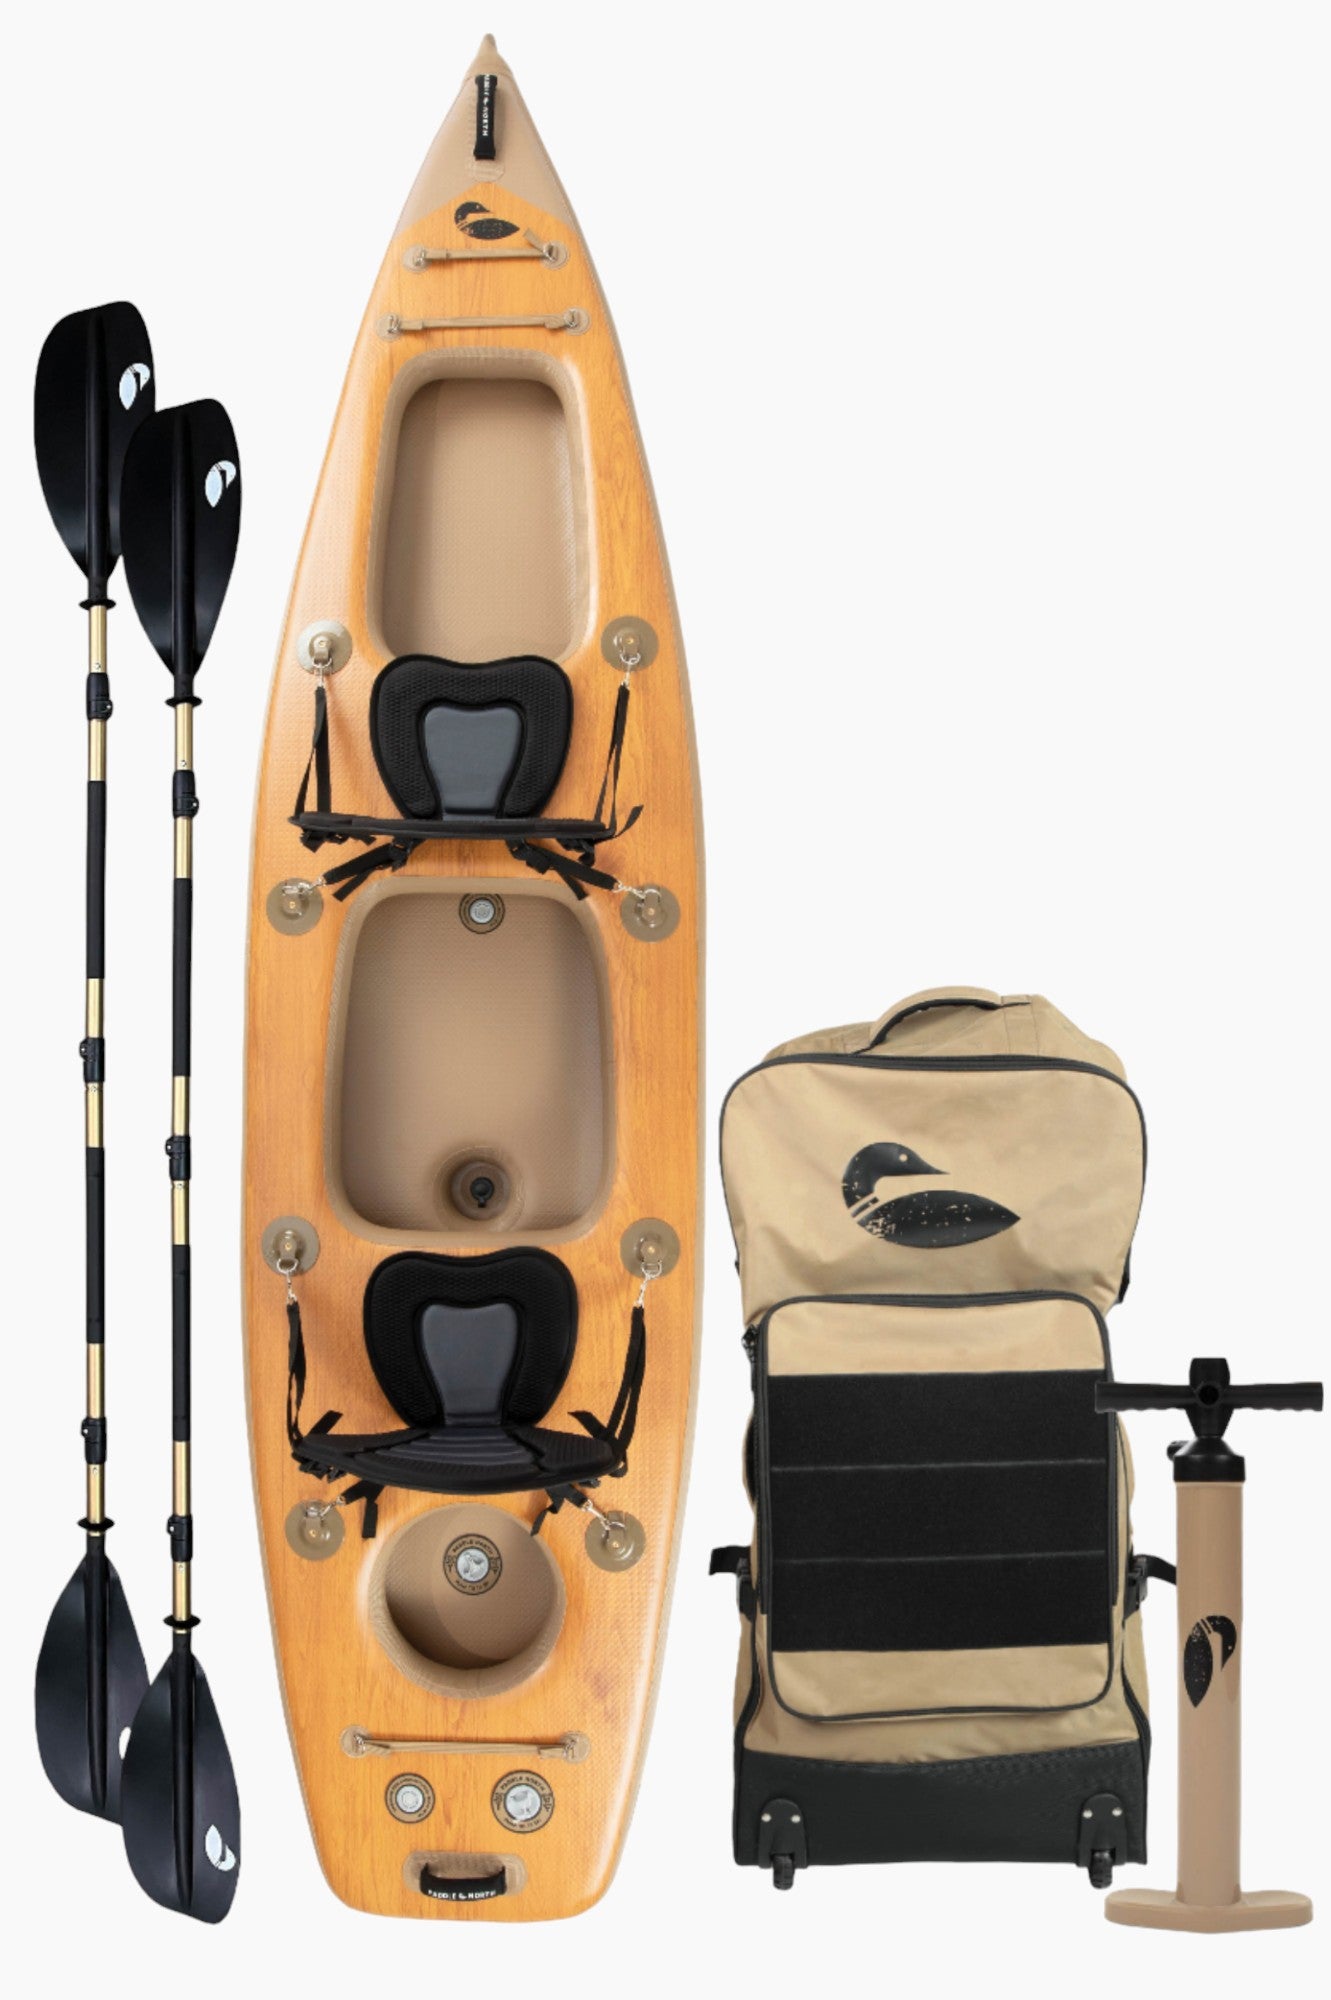 Inflatable double kayak with two seats, two black paddles, a kayak bag and a pump.